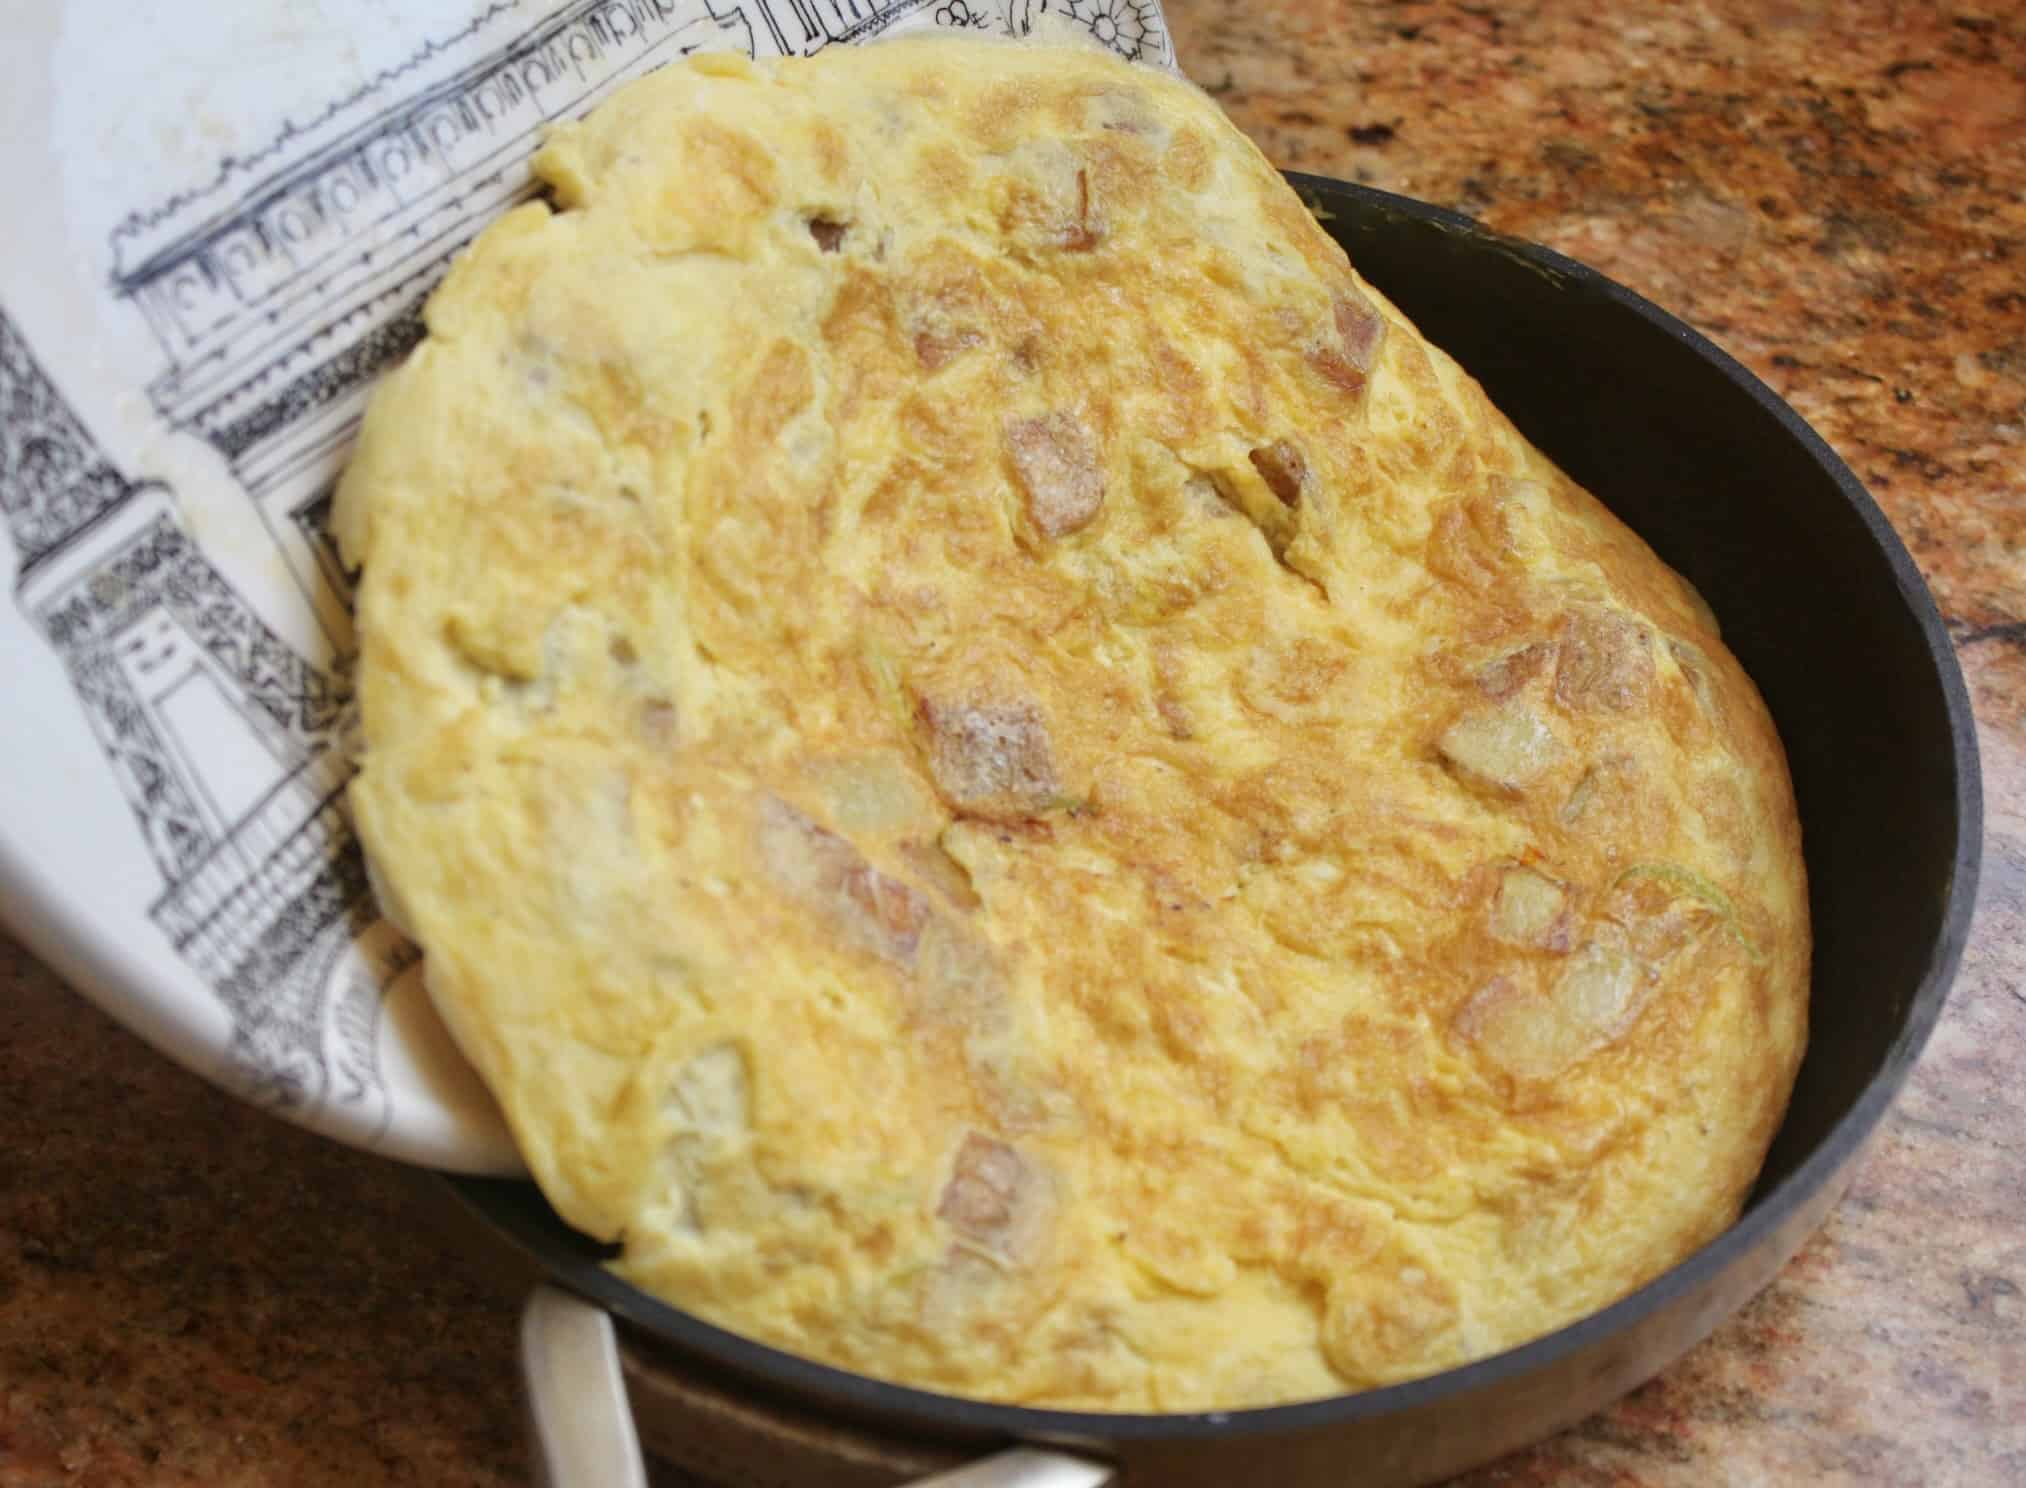 putting the frittata back into the pan.